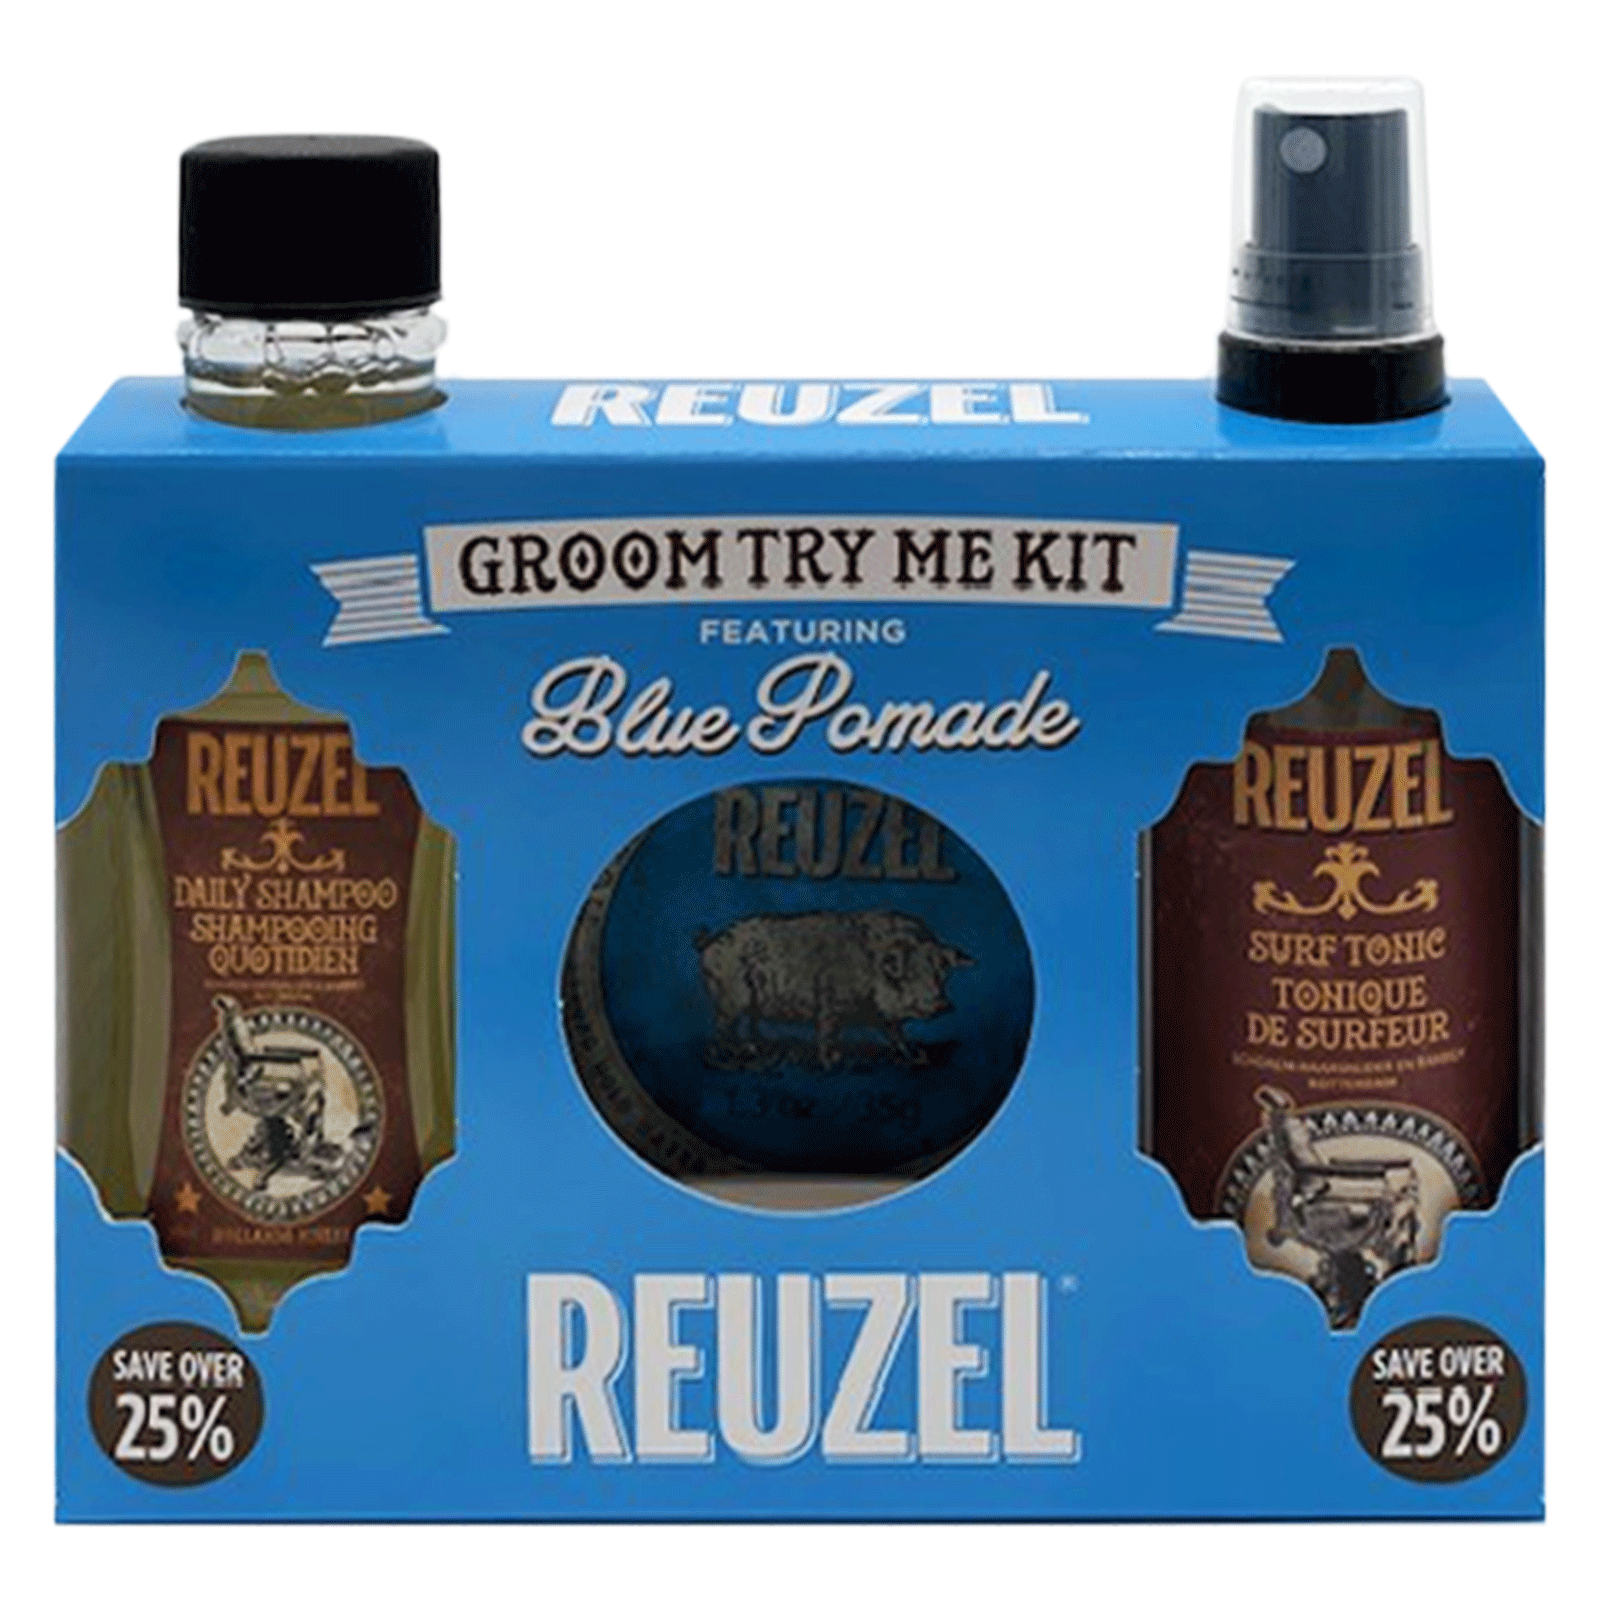 Groom Try Me Kit Featuring Blue Pomade